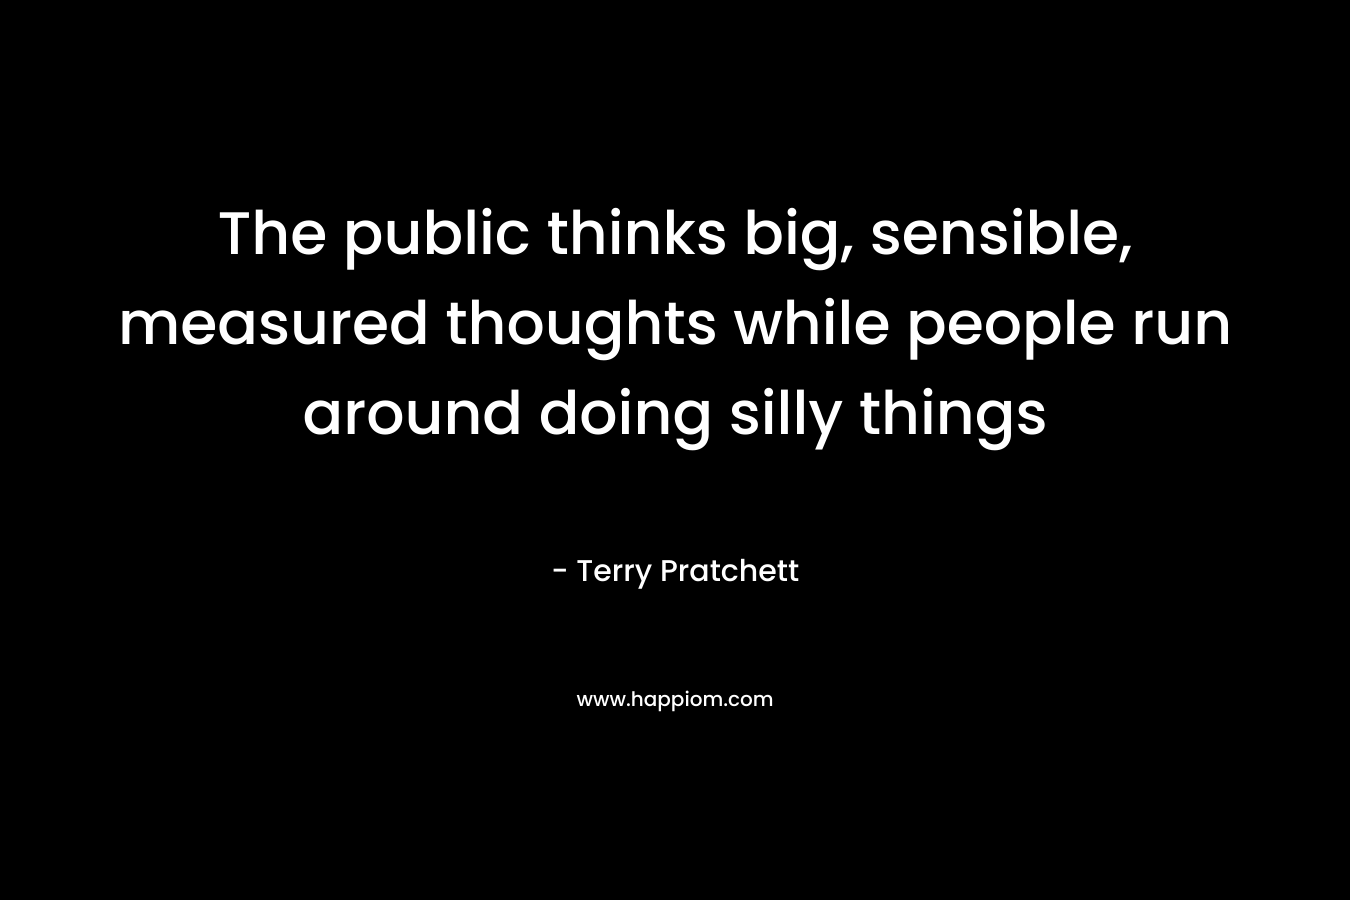 The public thinks big, sensible, measured thoughts while people run around doing silly things